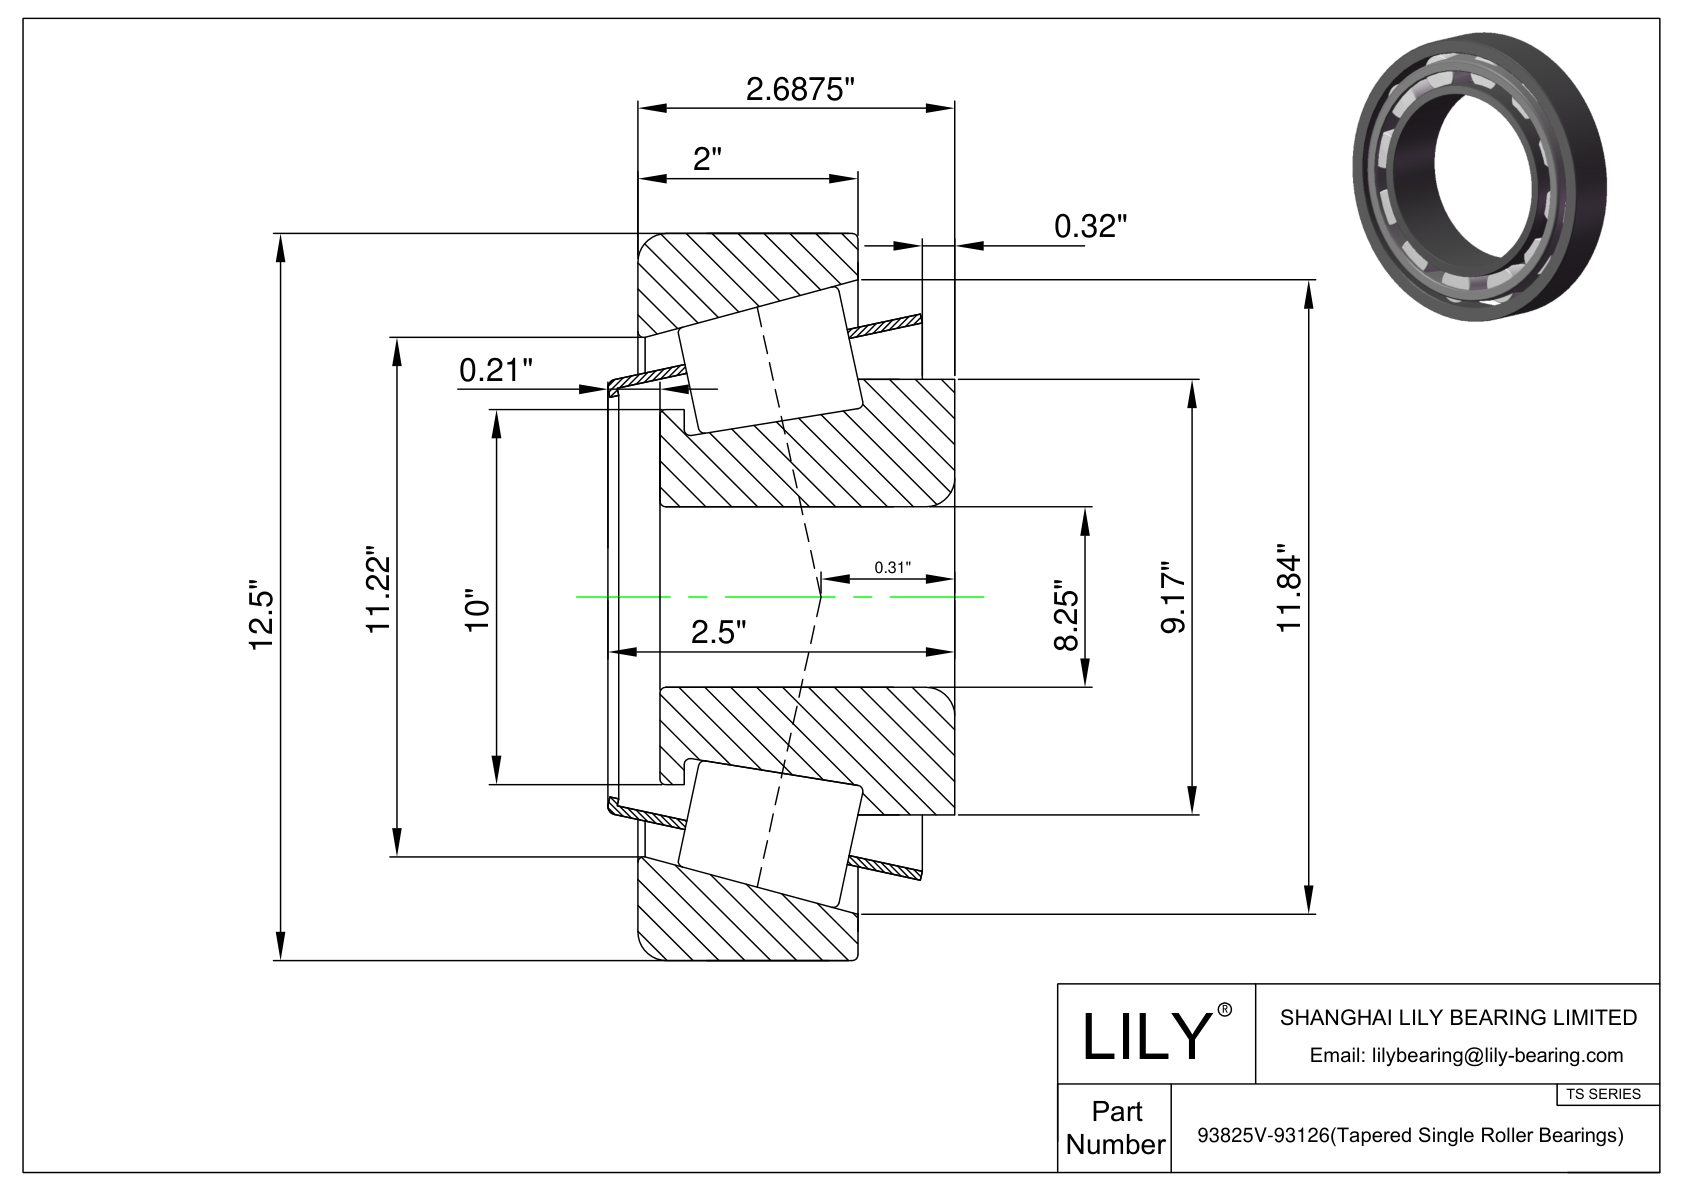 93825V-93126 TS (Tapered Single Roller Bearings) (Imperial) cad drawing